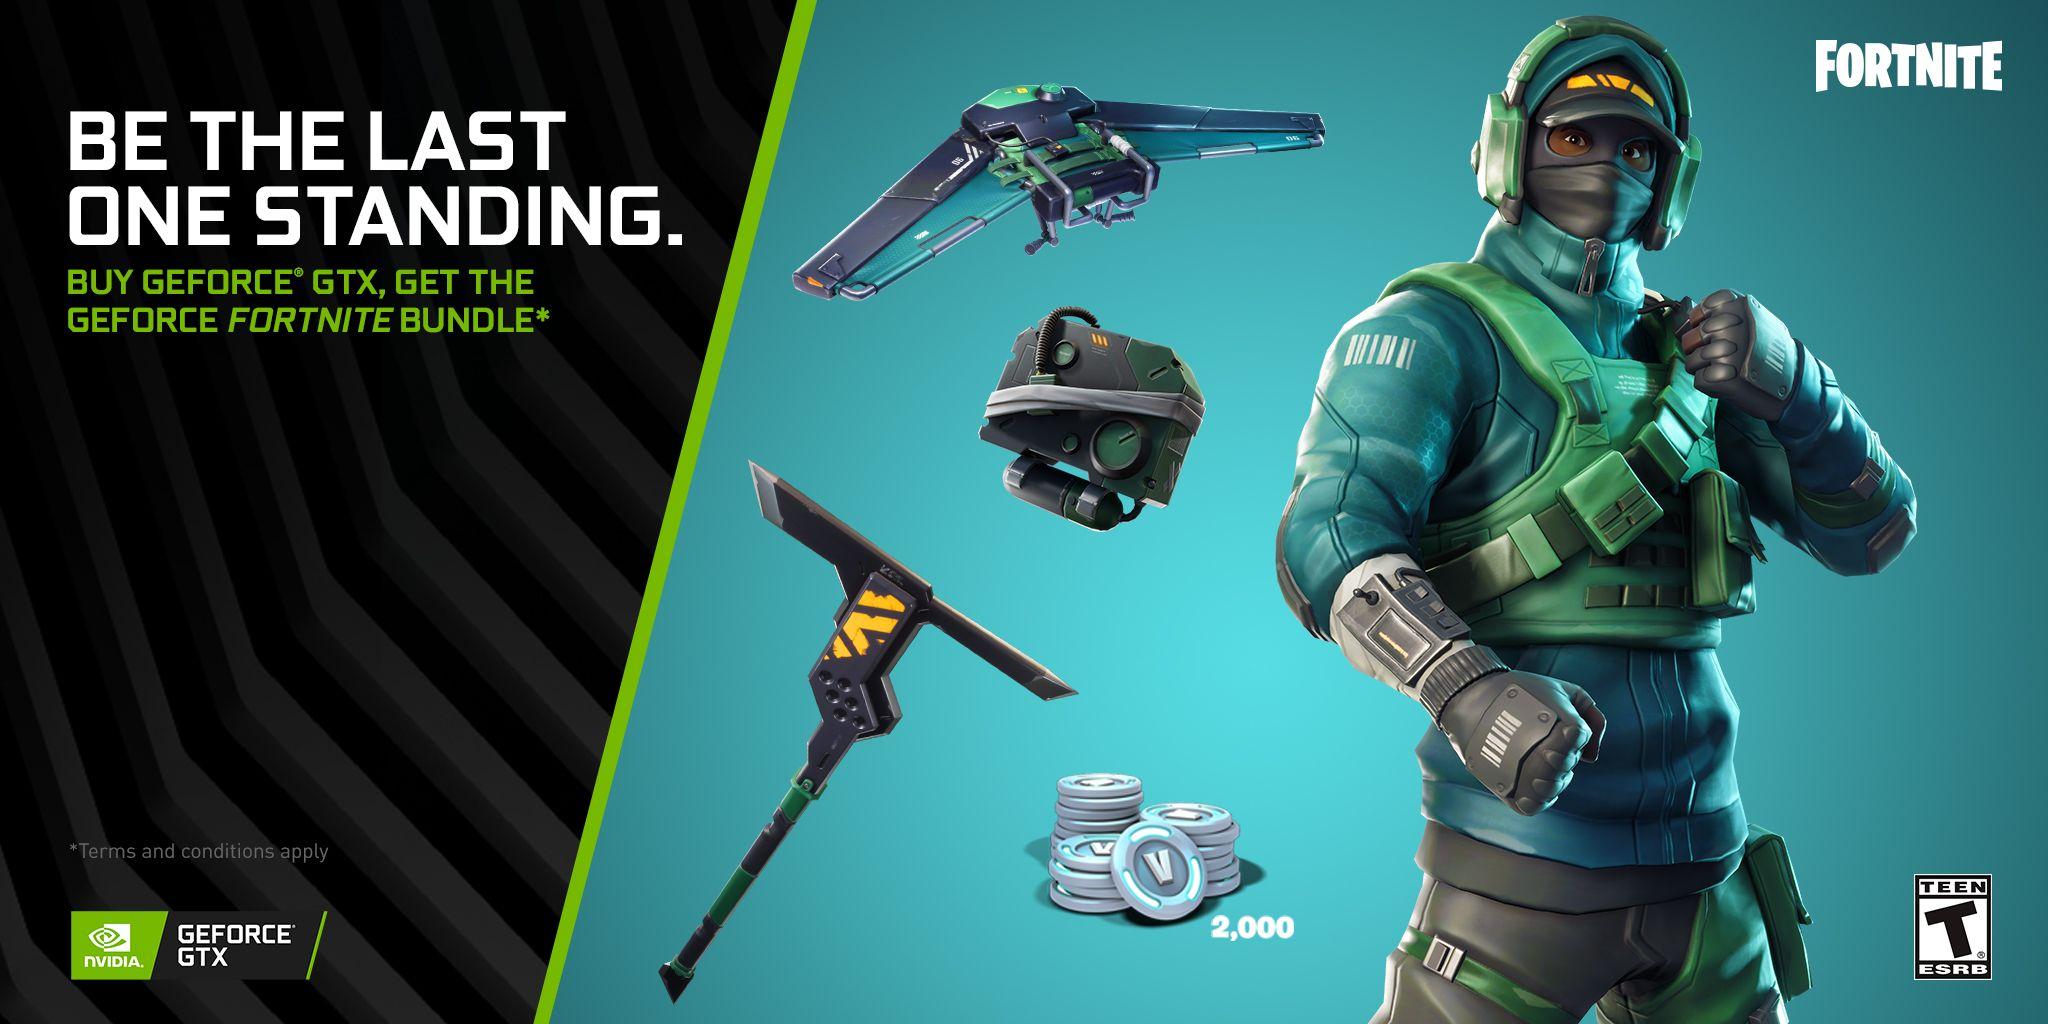 Just in time for the holidays and Fortnite's Season NVIDIA